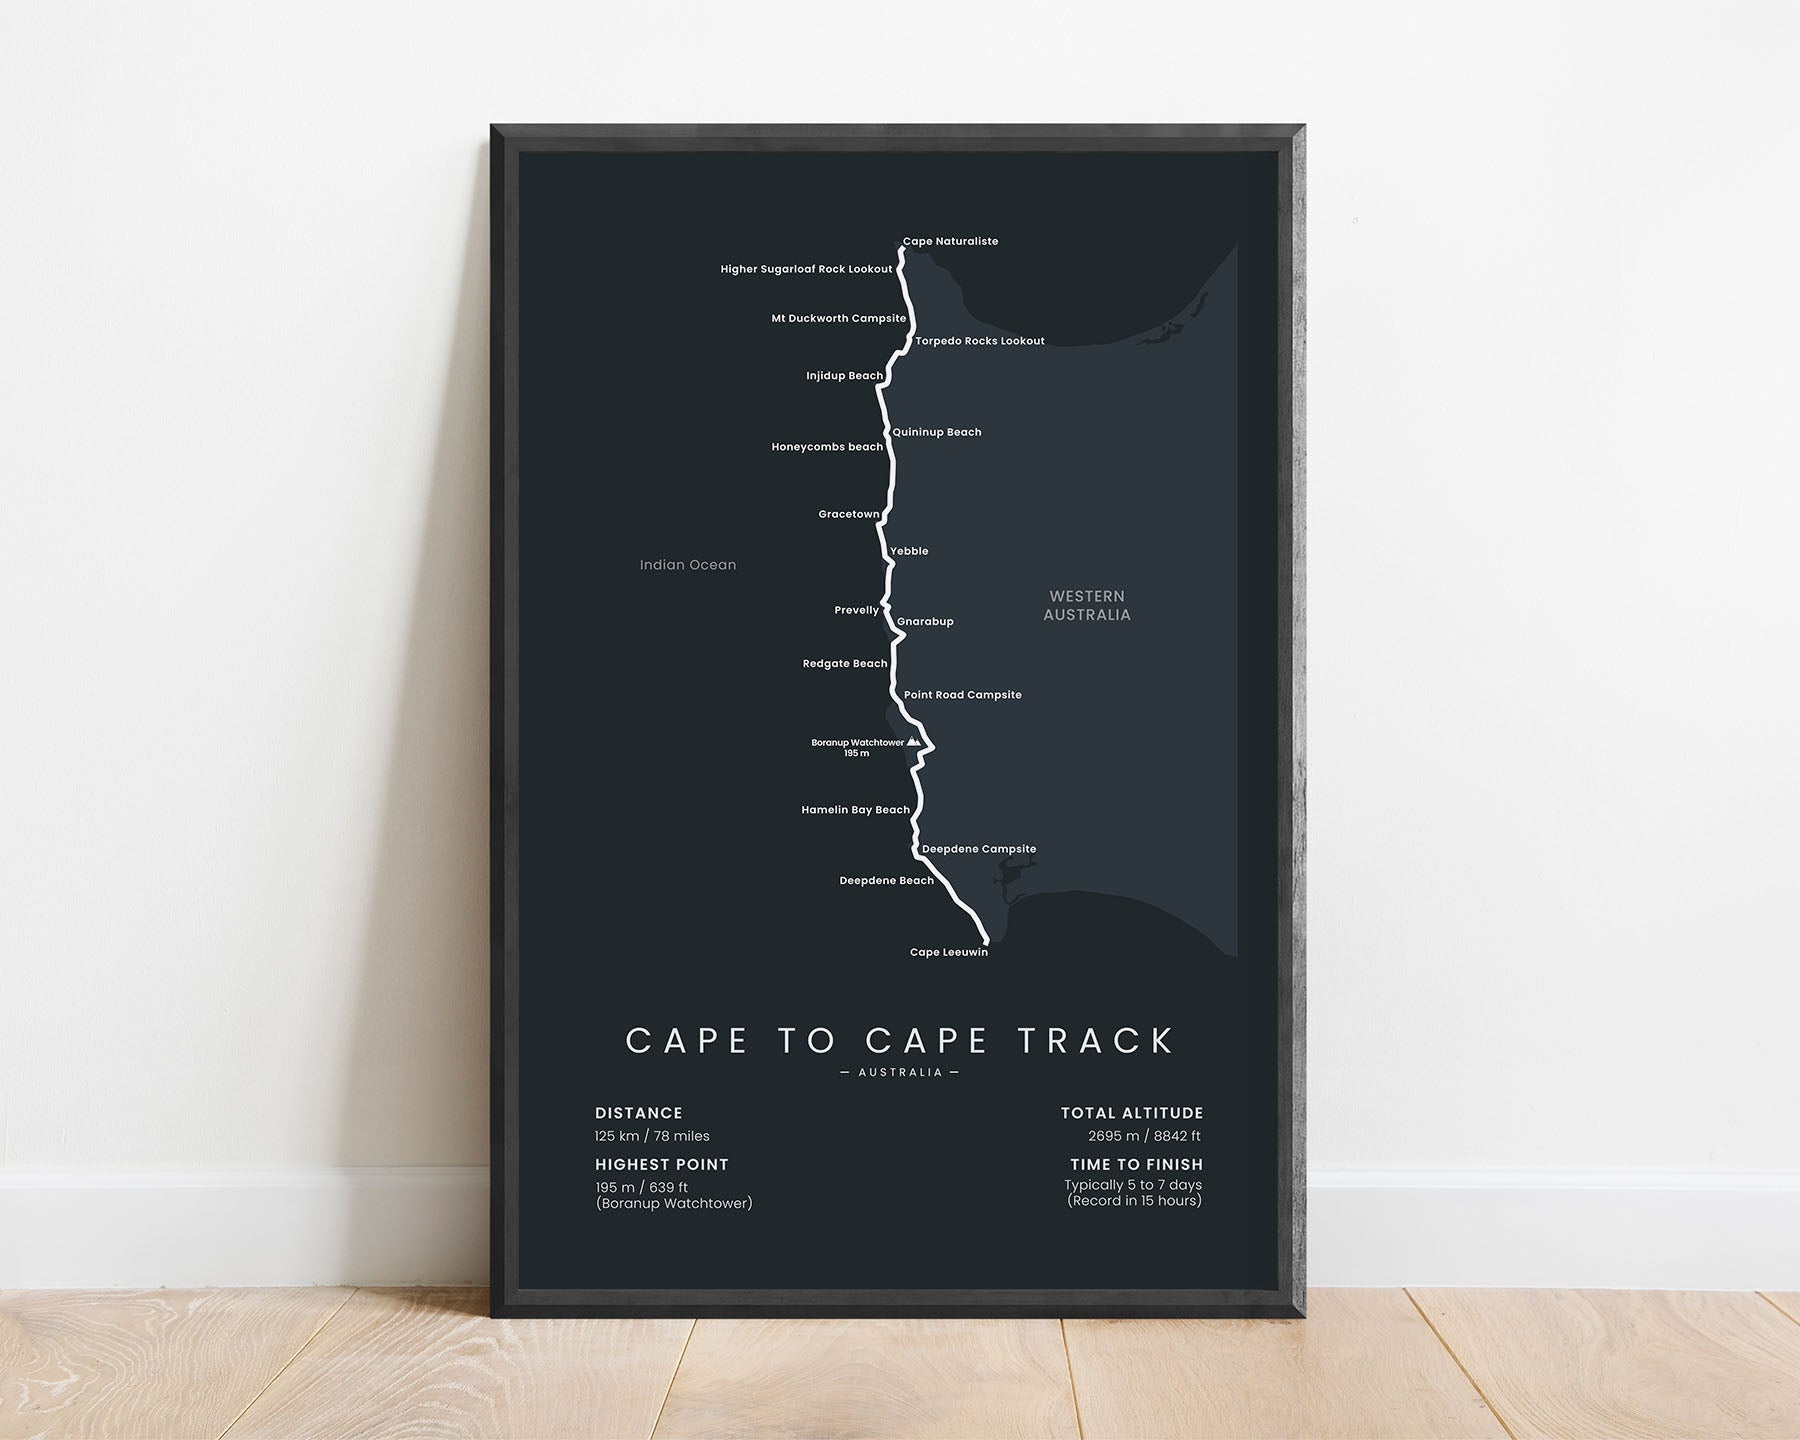 Cape to Cape Walk (Margaret River) hike wall map with black background